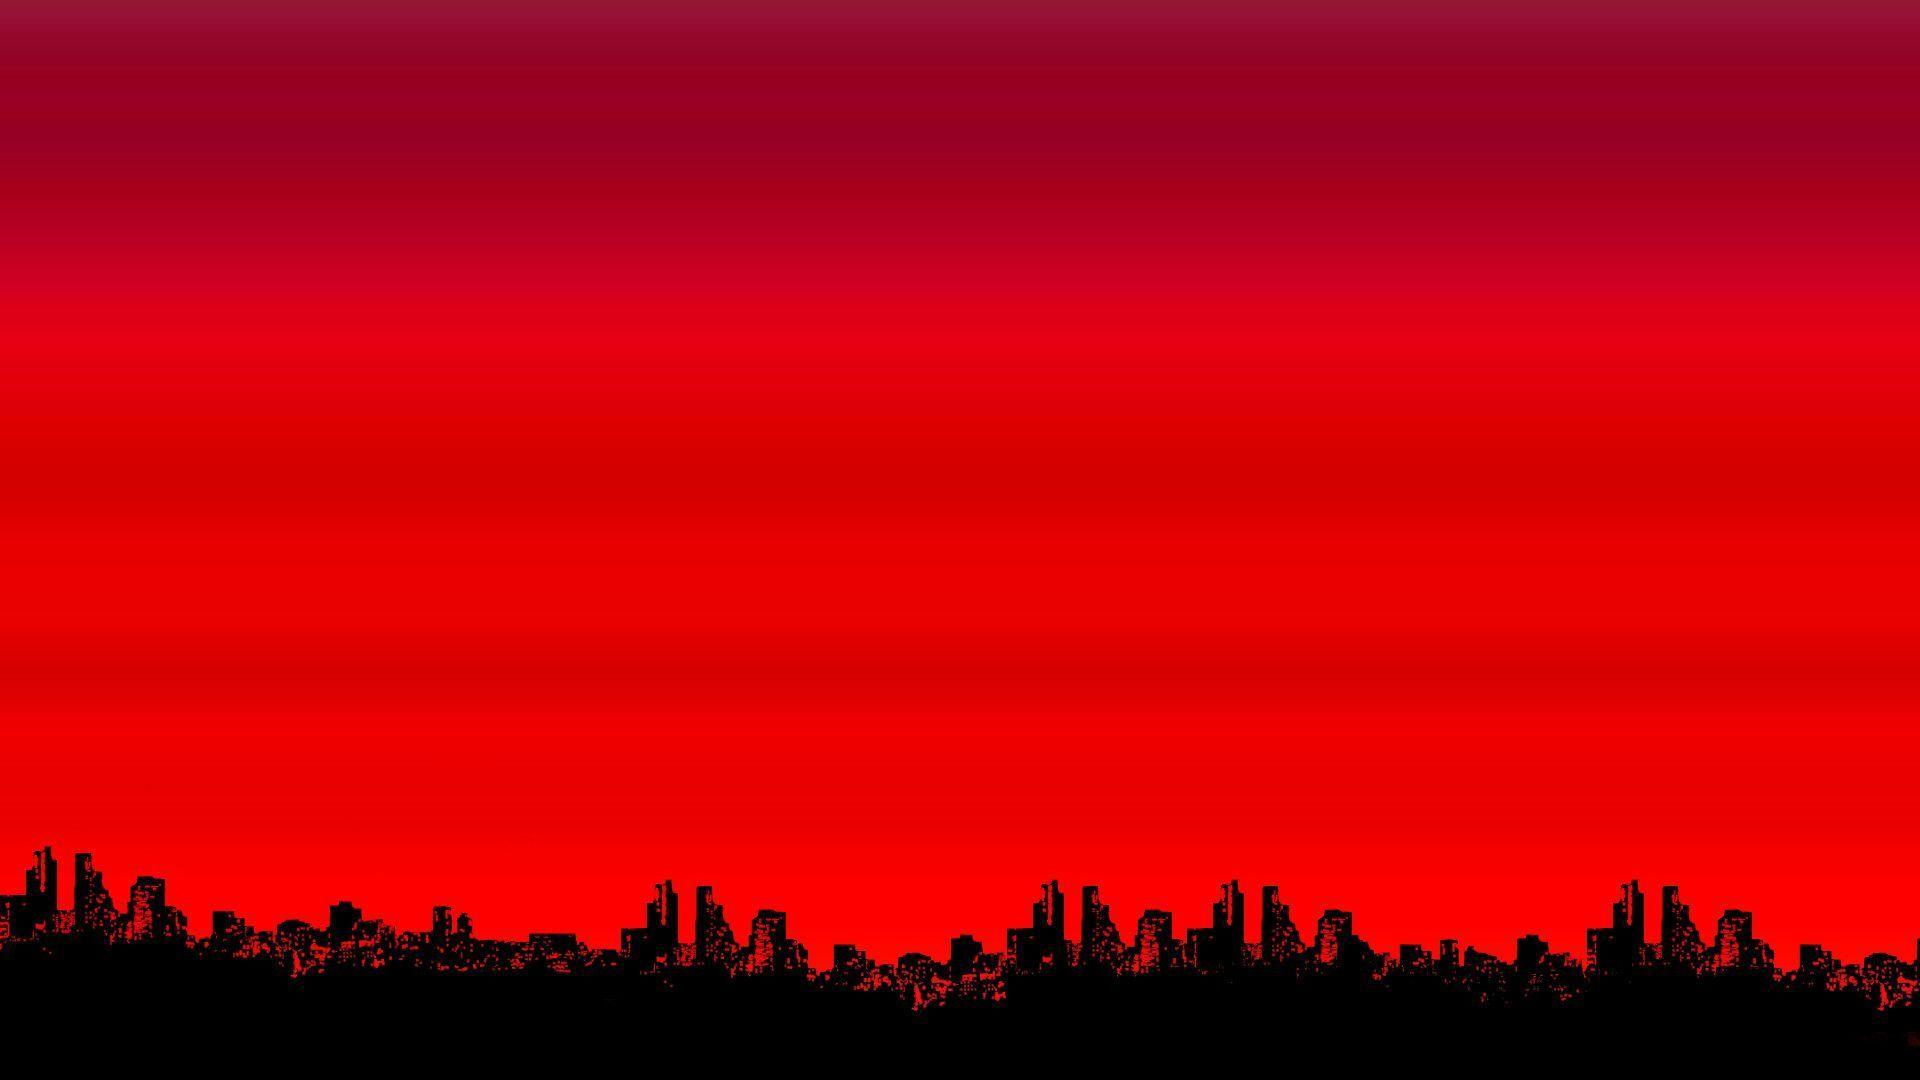 Total 88+ imagen red and black aesthetic background - Thcshoanghoatham ...